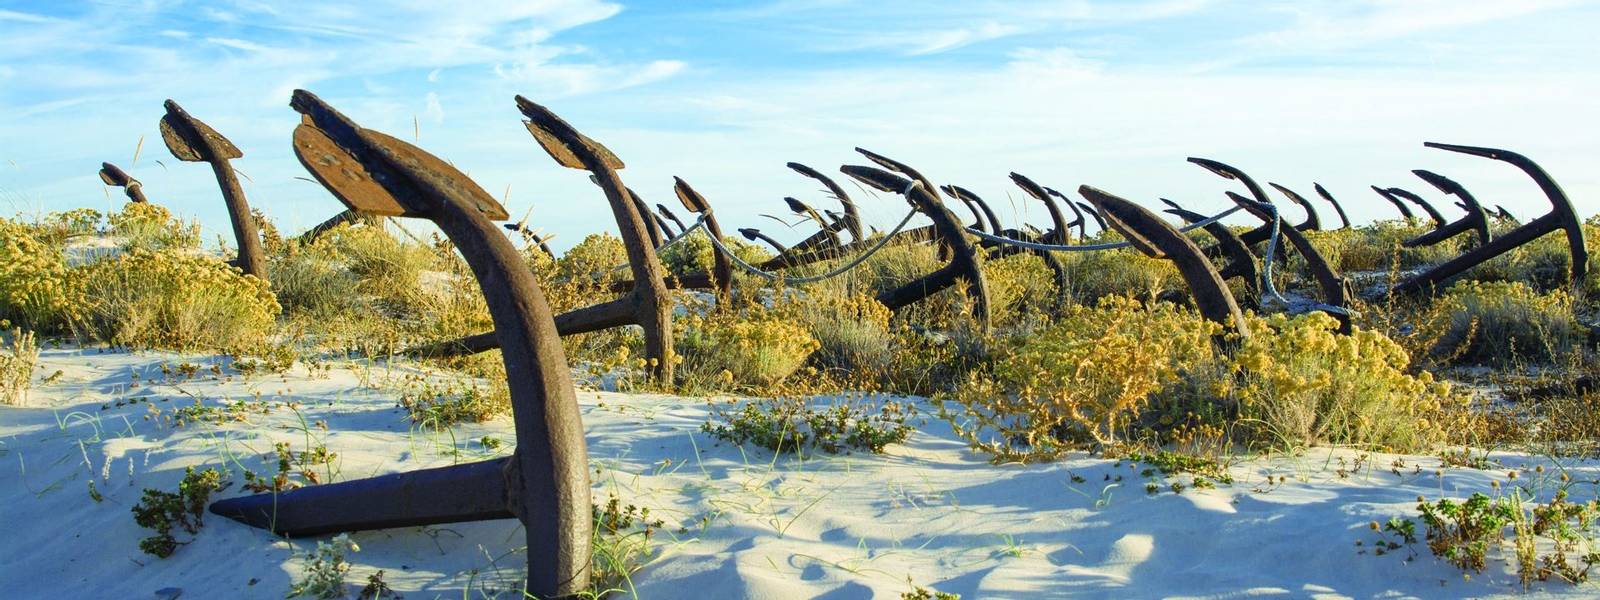 The old Anchor cemetery at the Barril beach